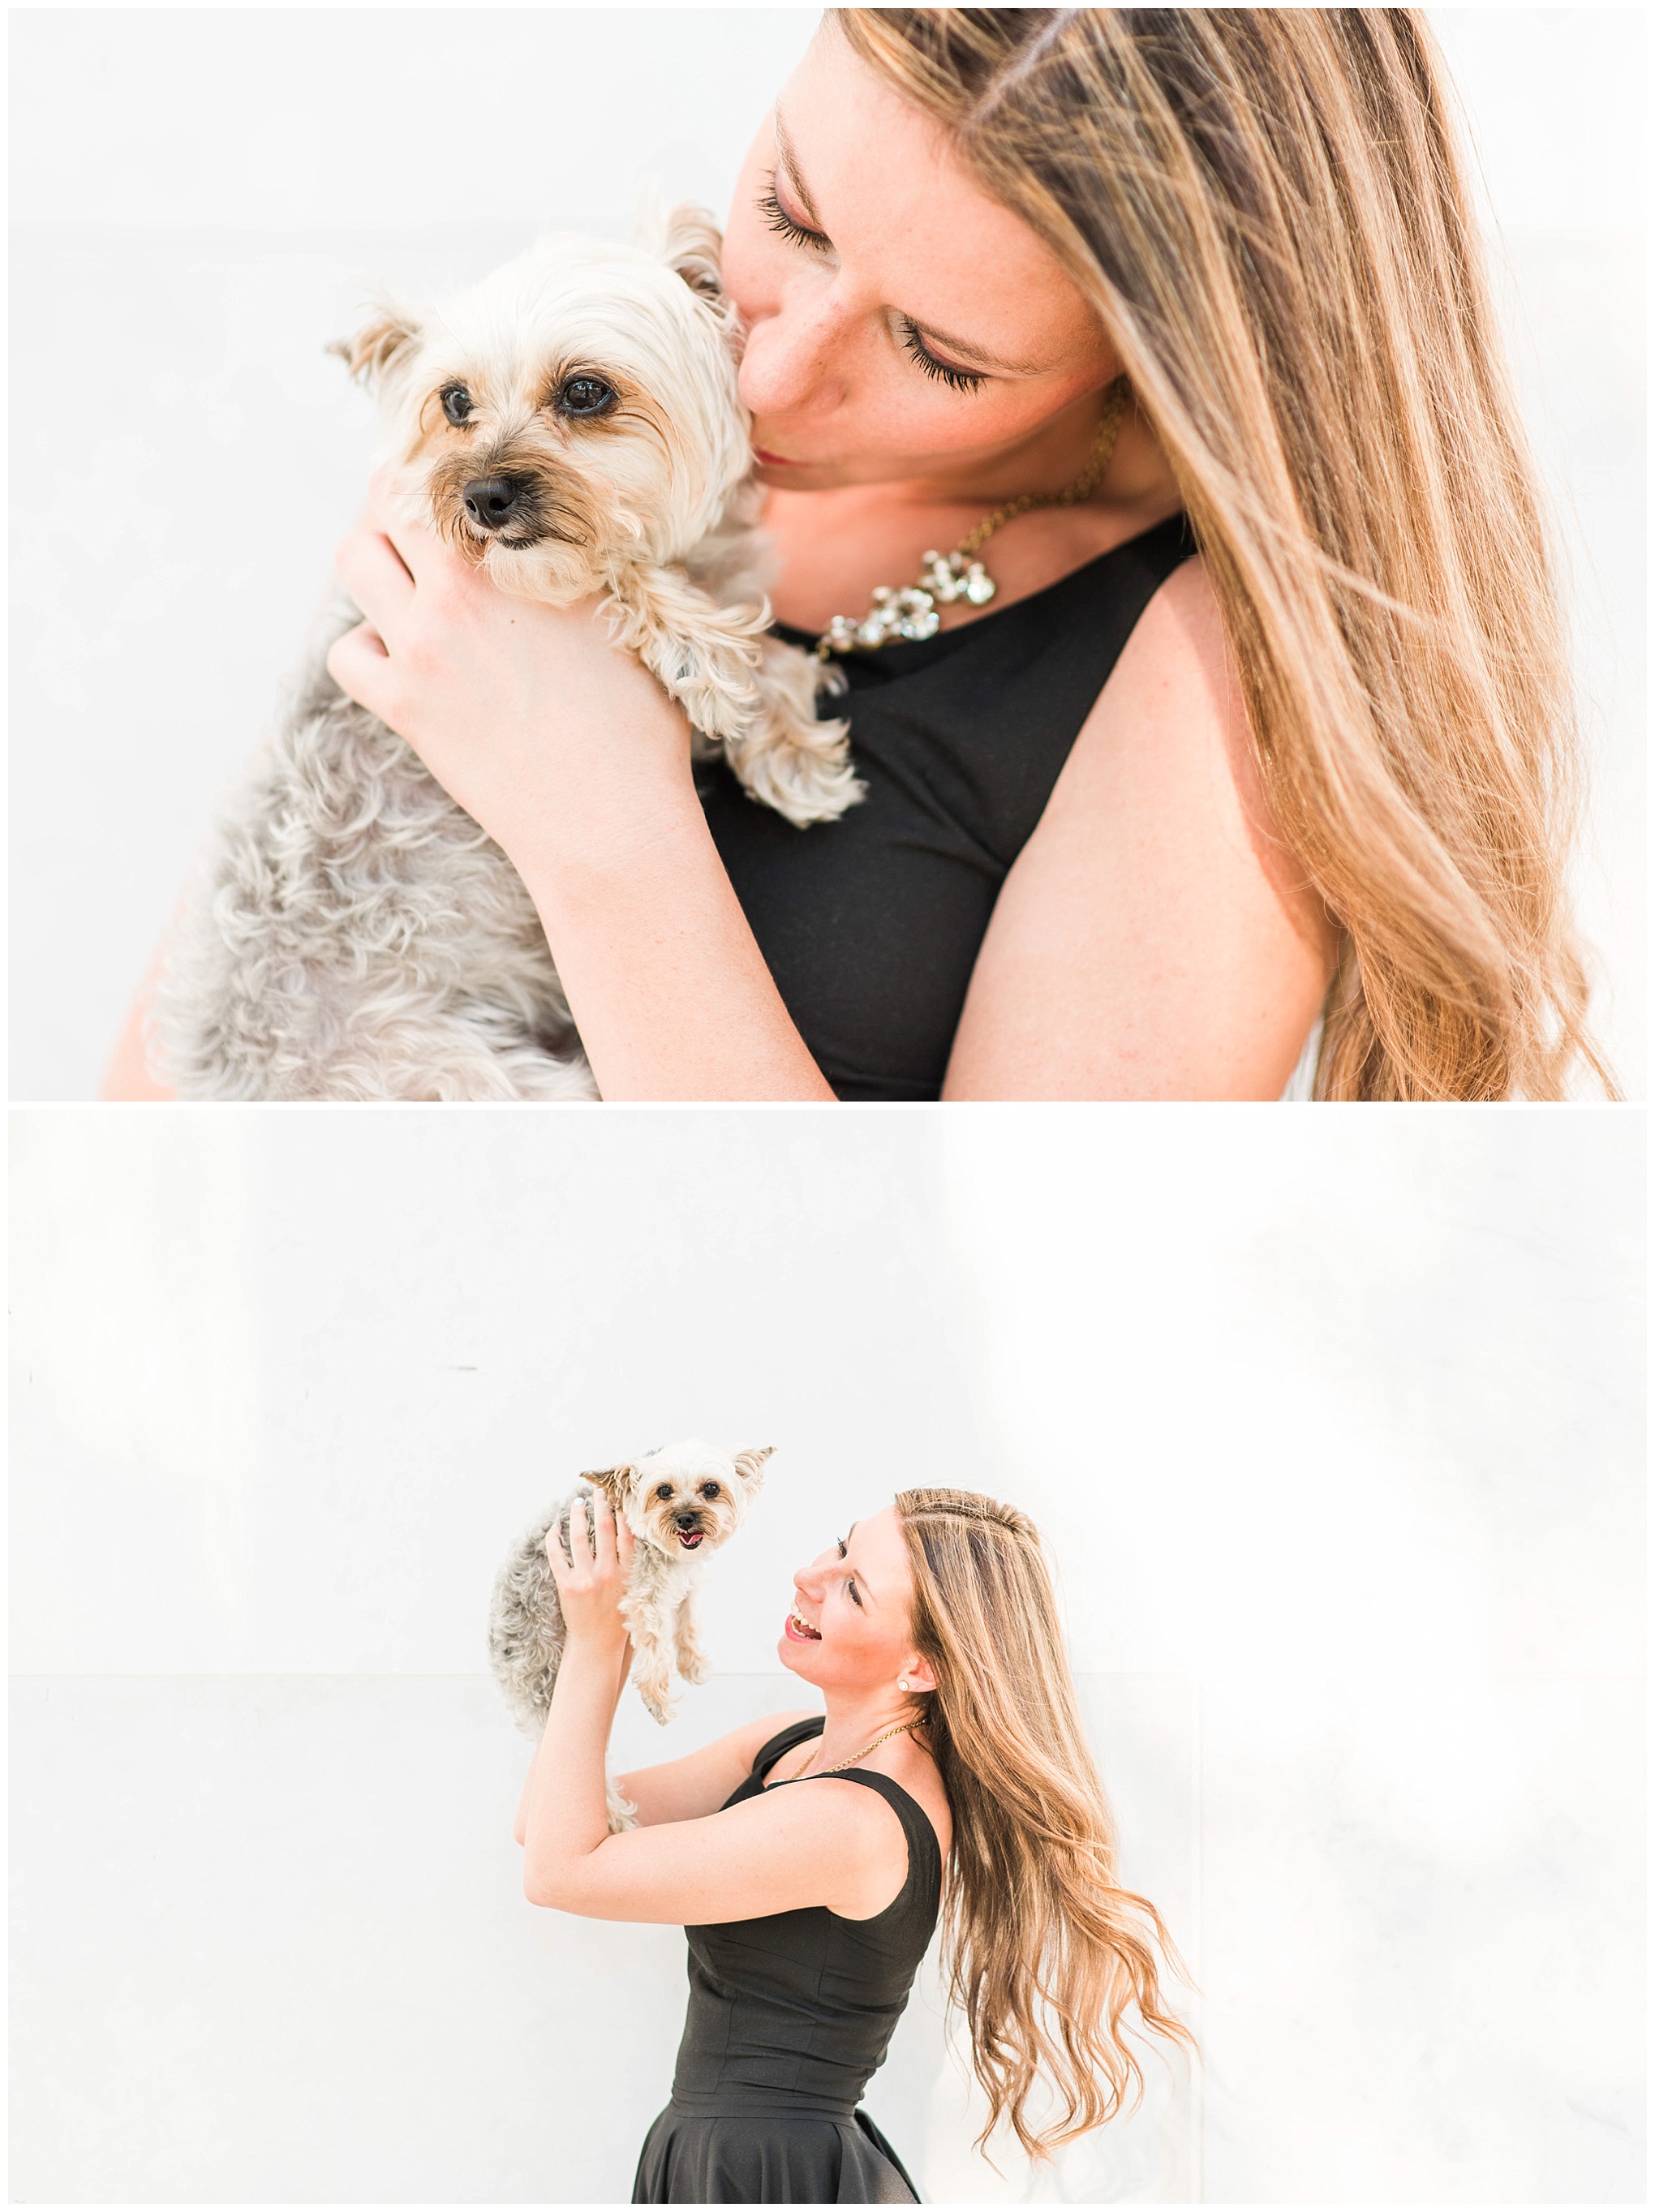 photography website launch, website launch, D.C. photographer, D.C. wedding photographer, D.C., headshots, branding session, J. Crew, The Kennedy Center, black dress, Rent The Runway, yorkipoo, small dog